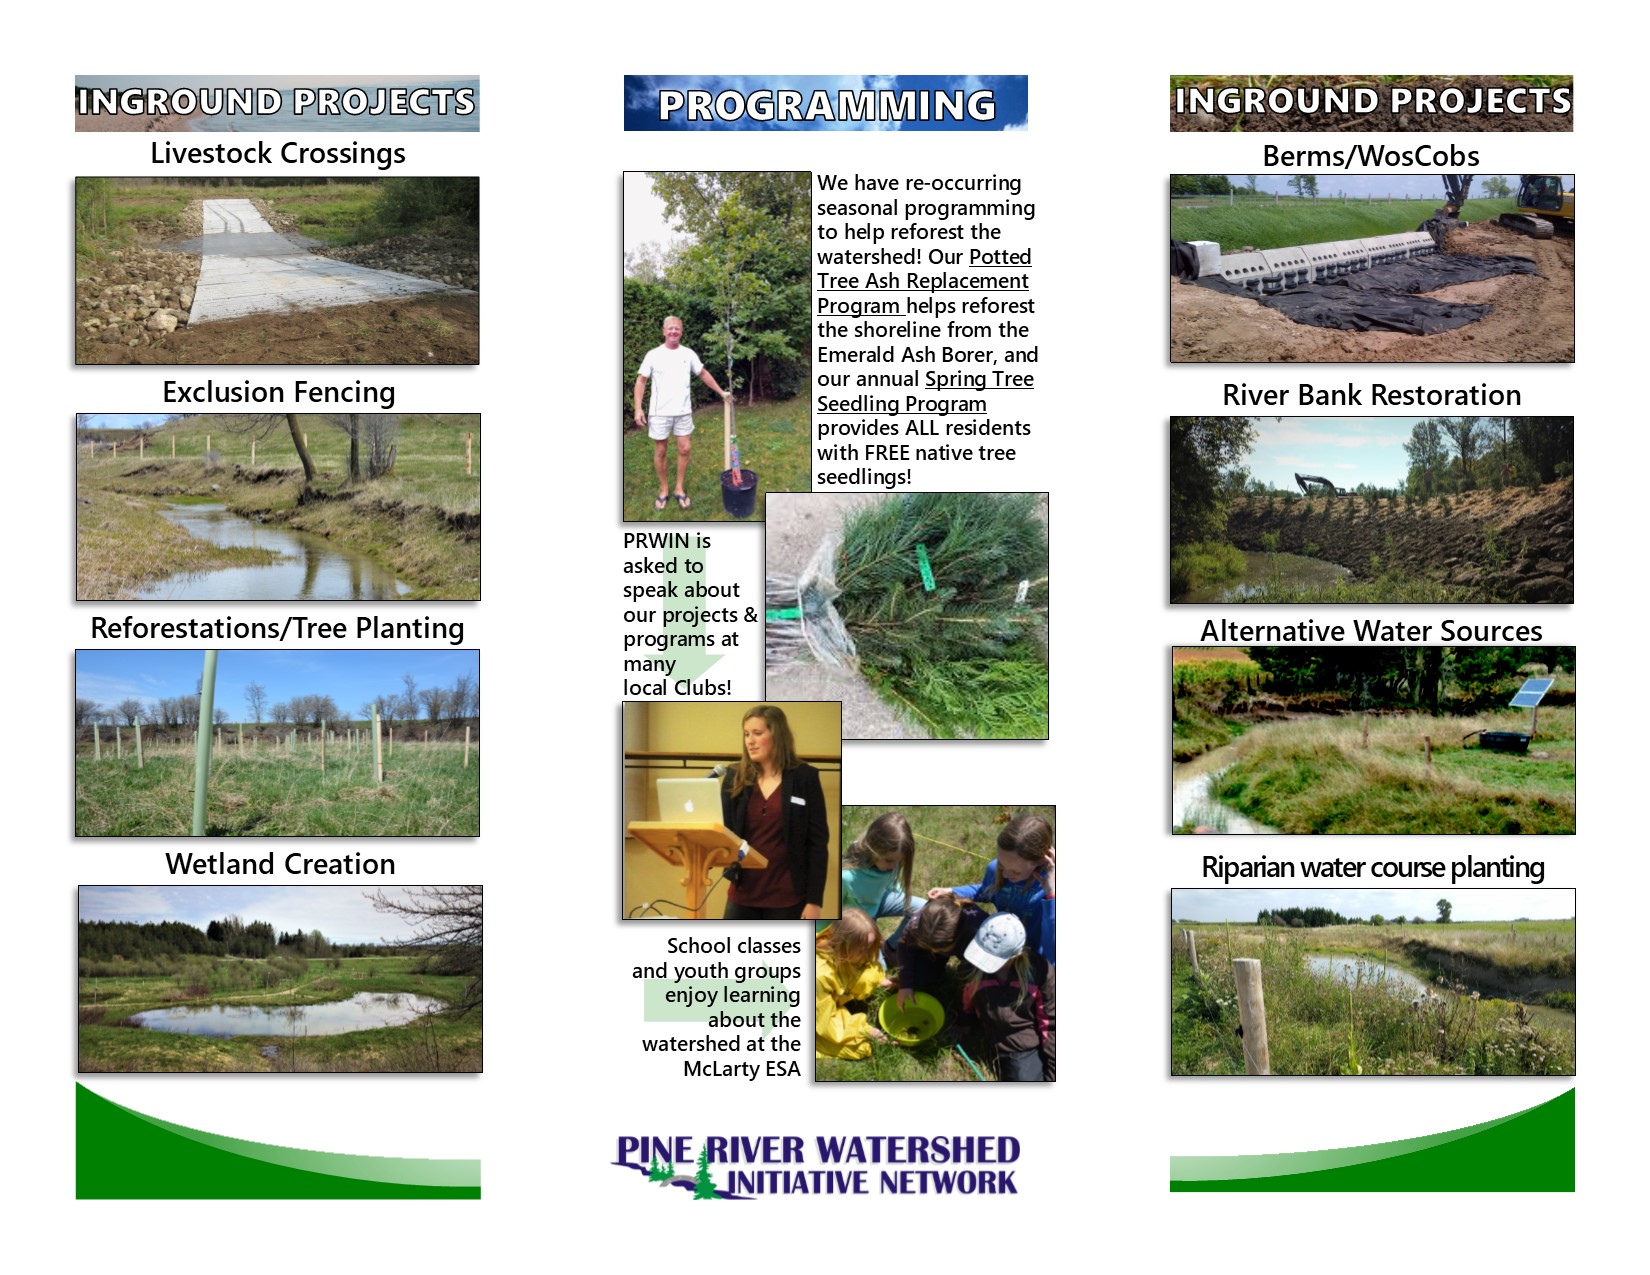 New Pine River Watershed Brochure!